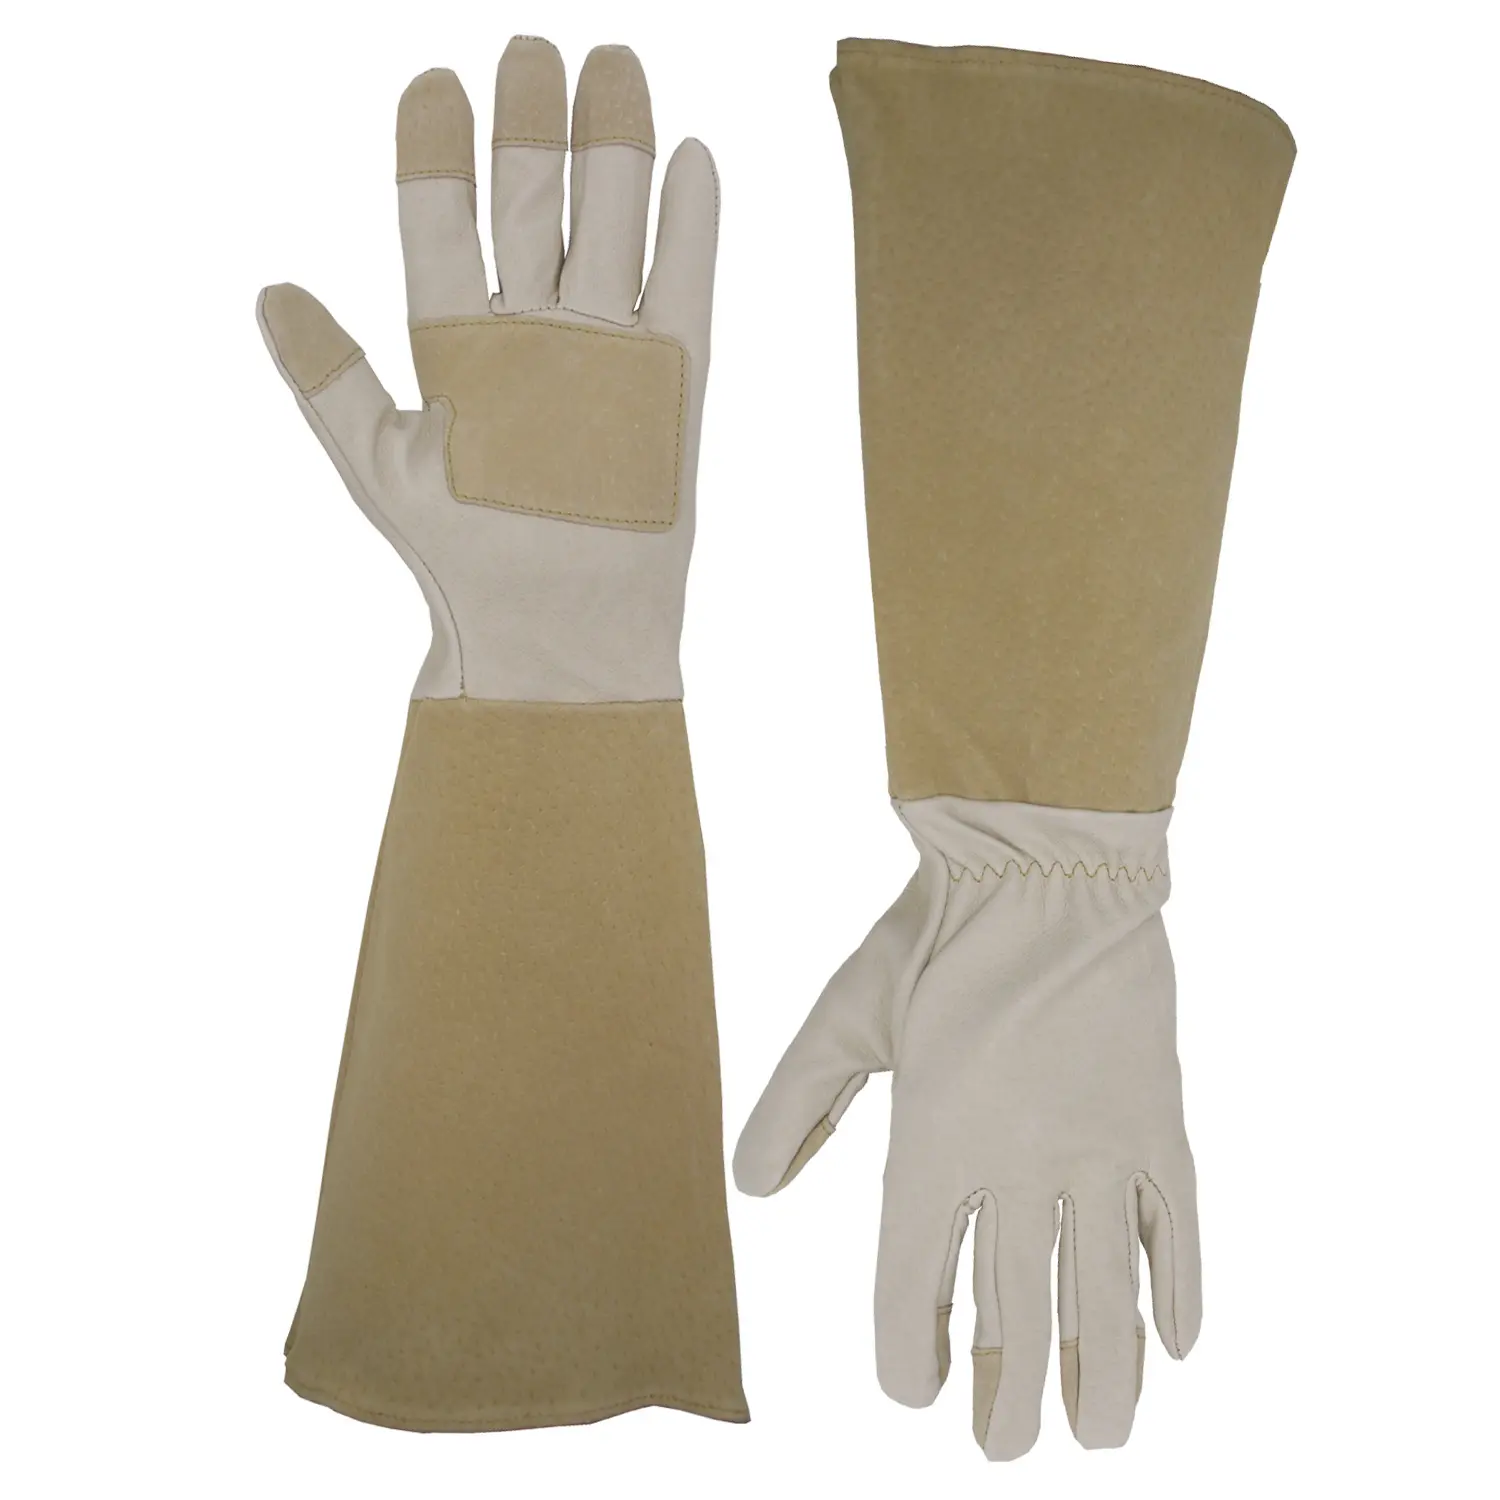 long protective gloves